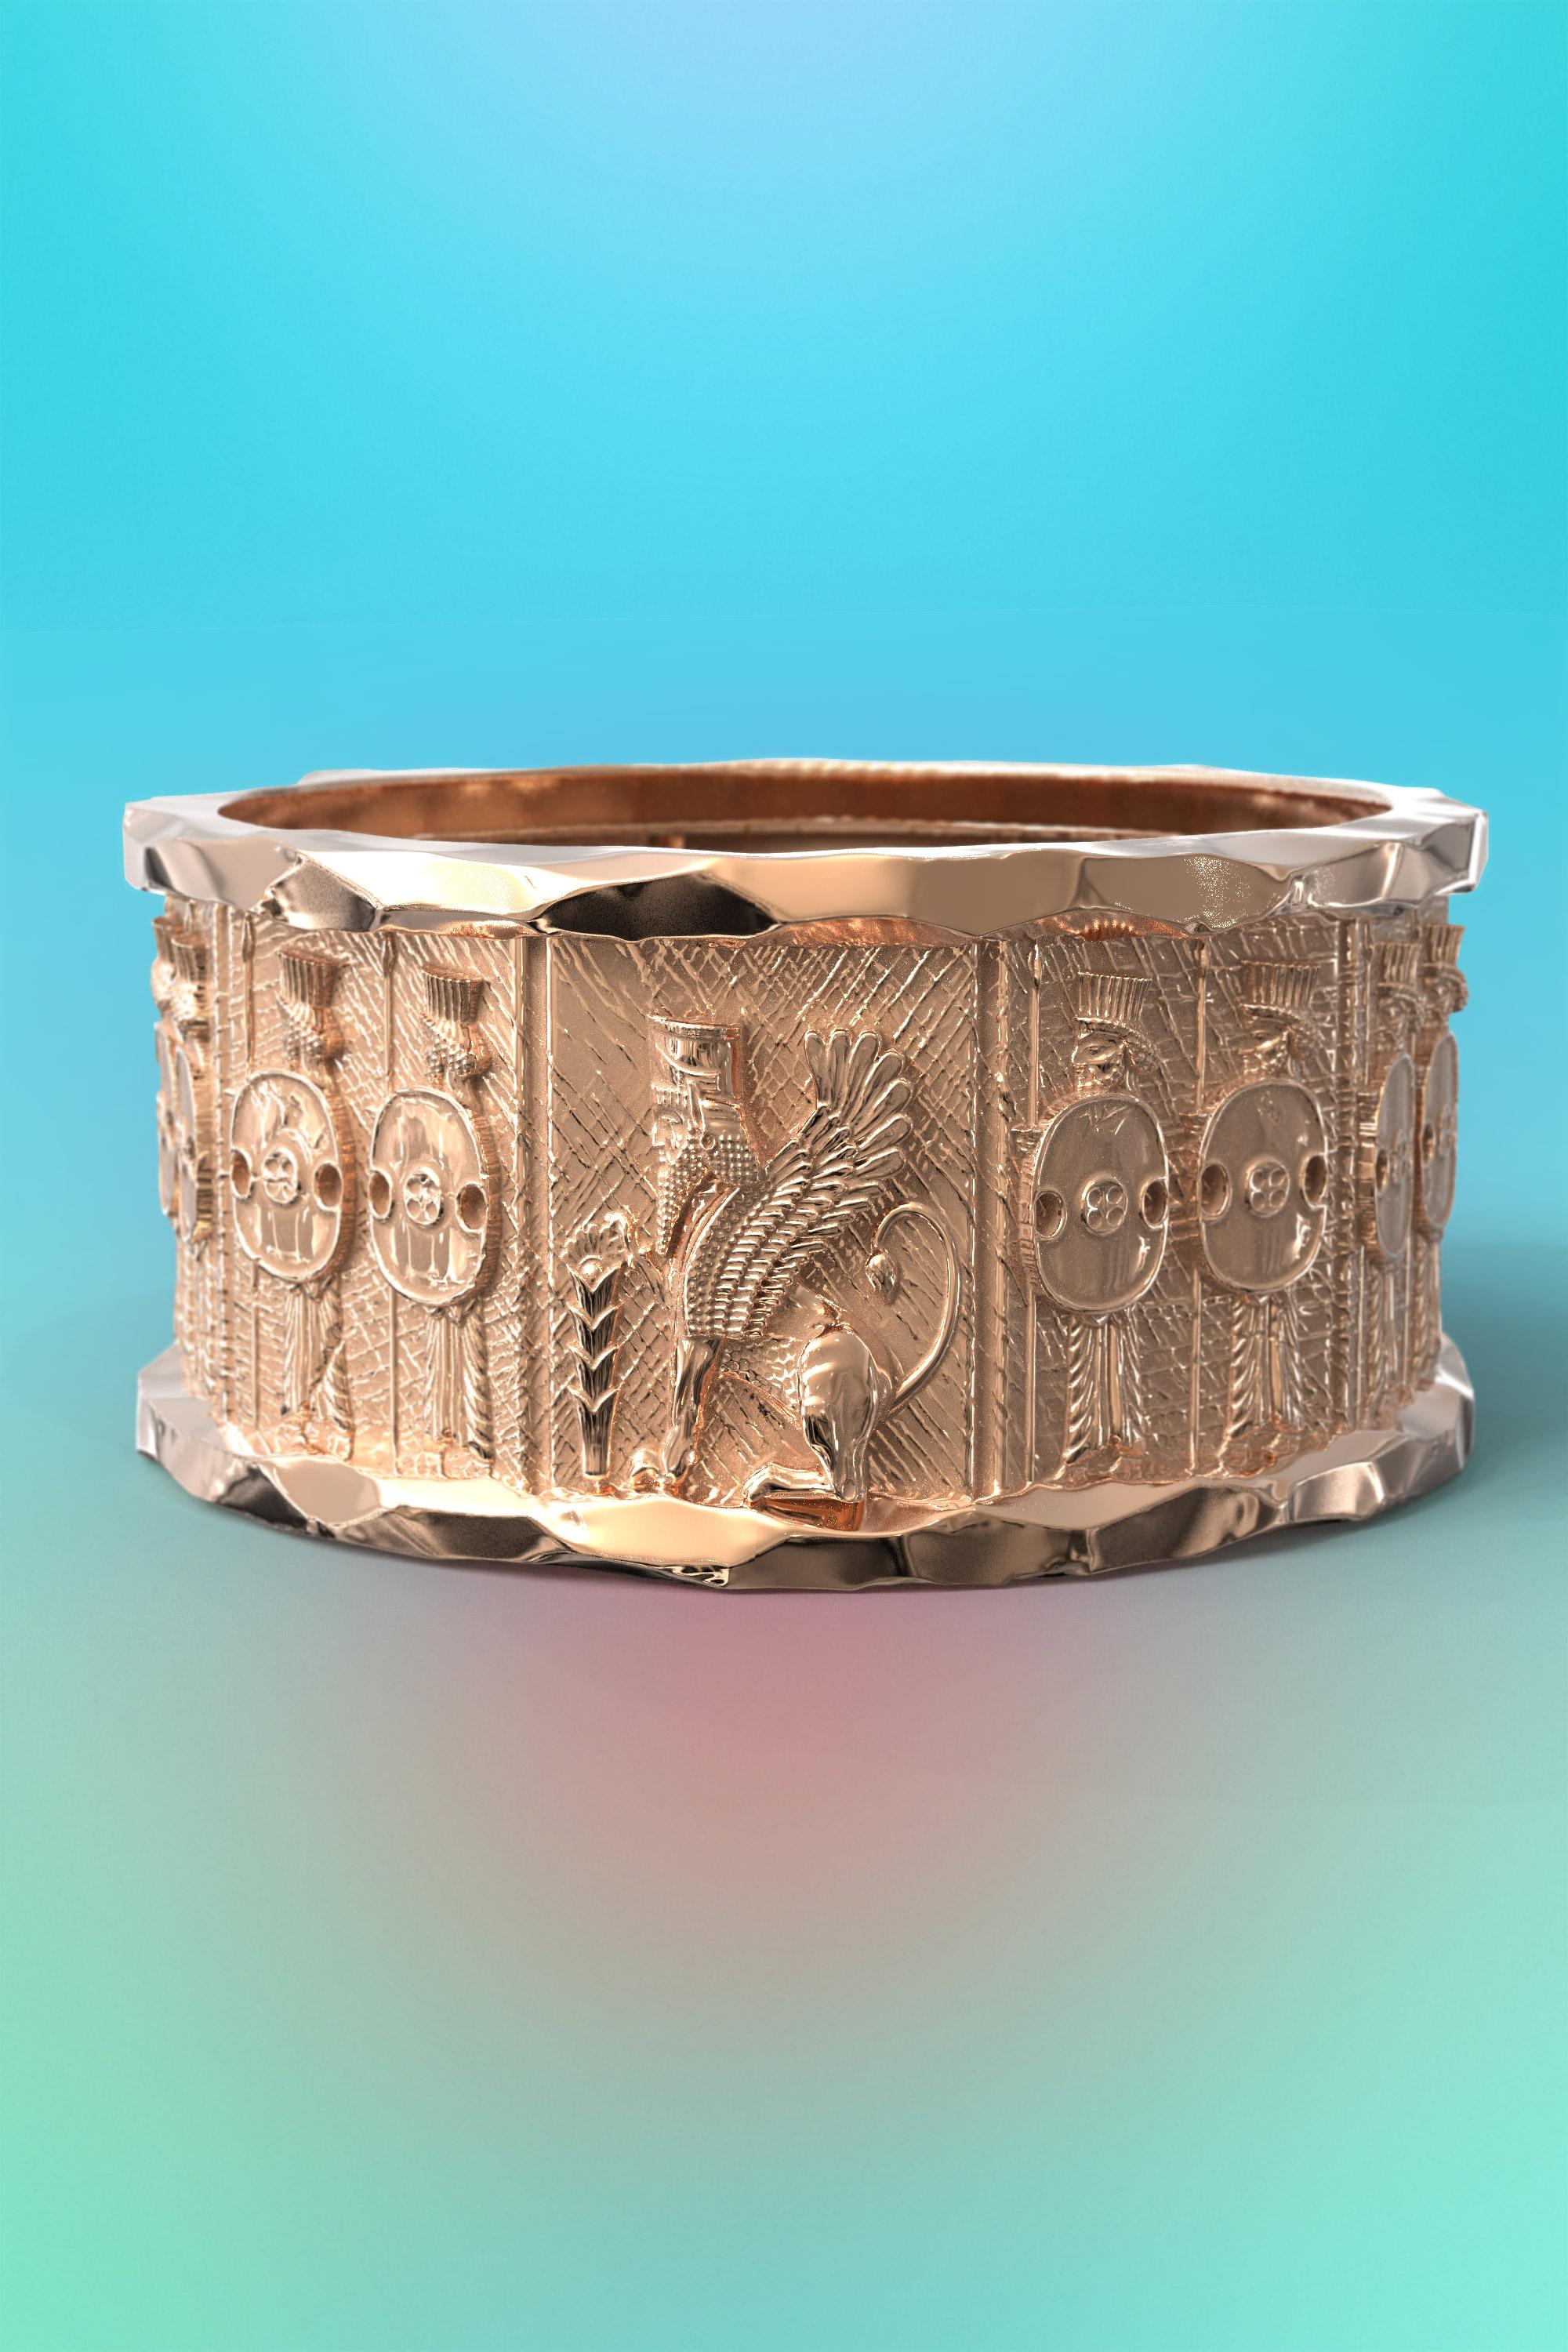 For Sale:  Italian 14k Gold Ring with Temple of Persepolis Bas-Reliefs, Persian Style Ring  11